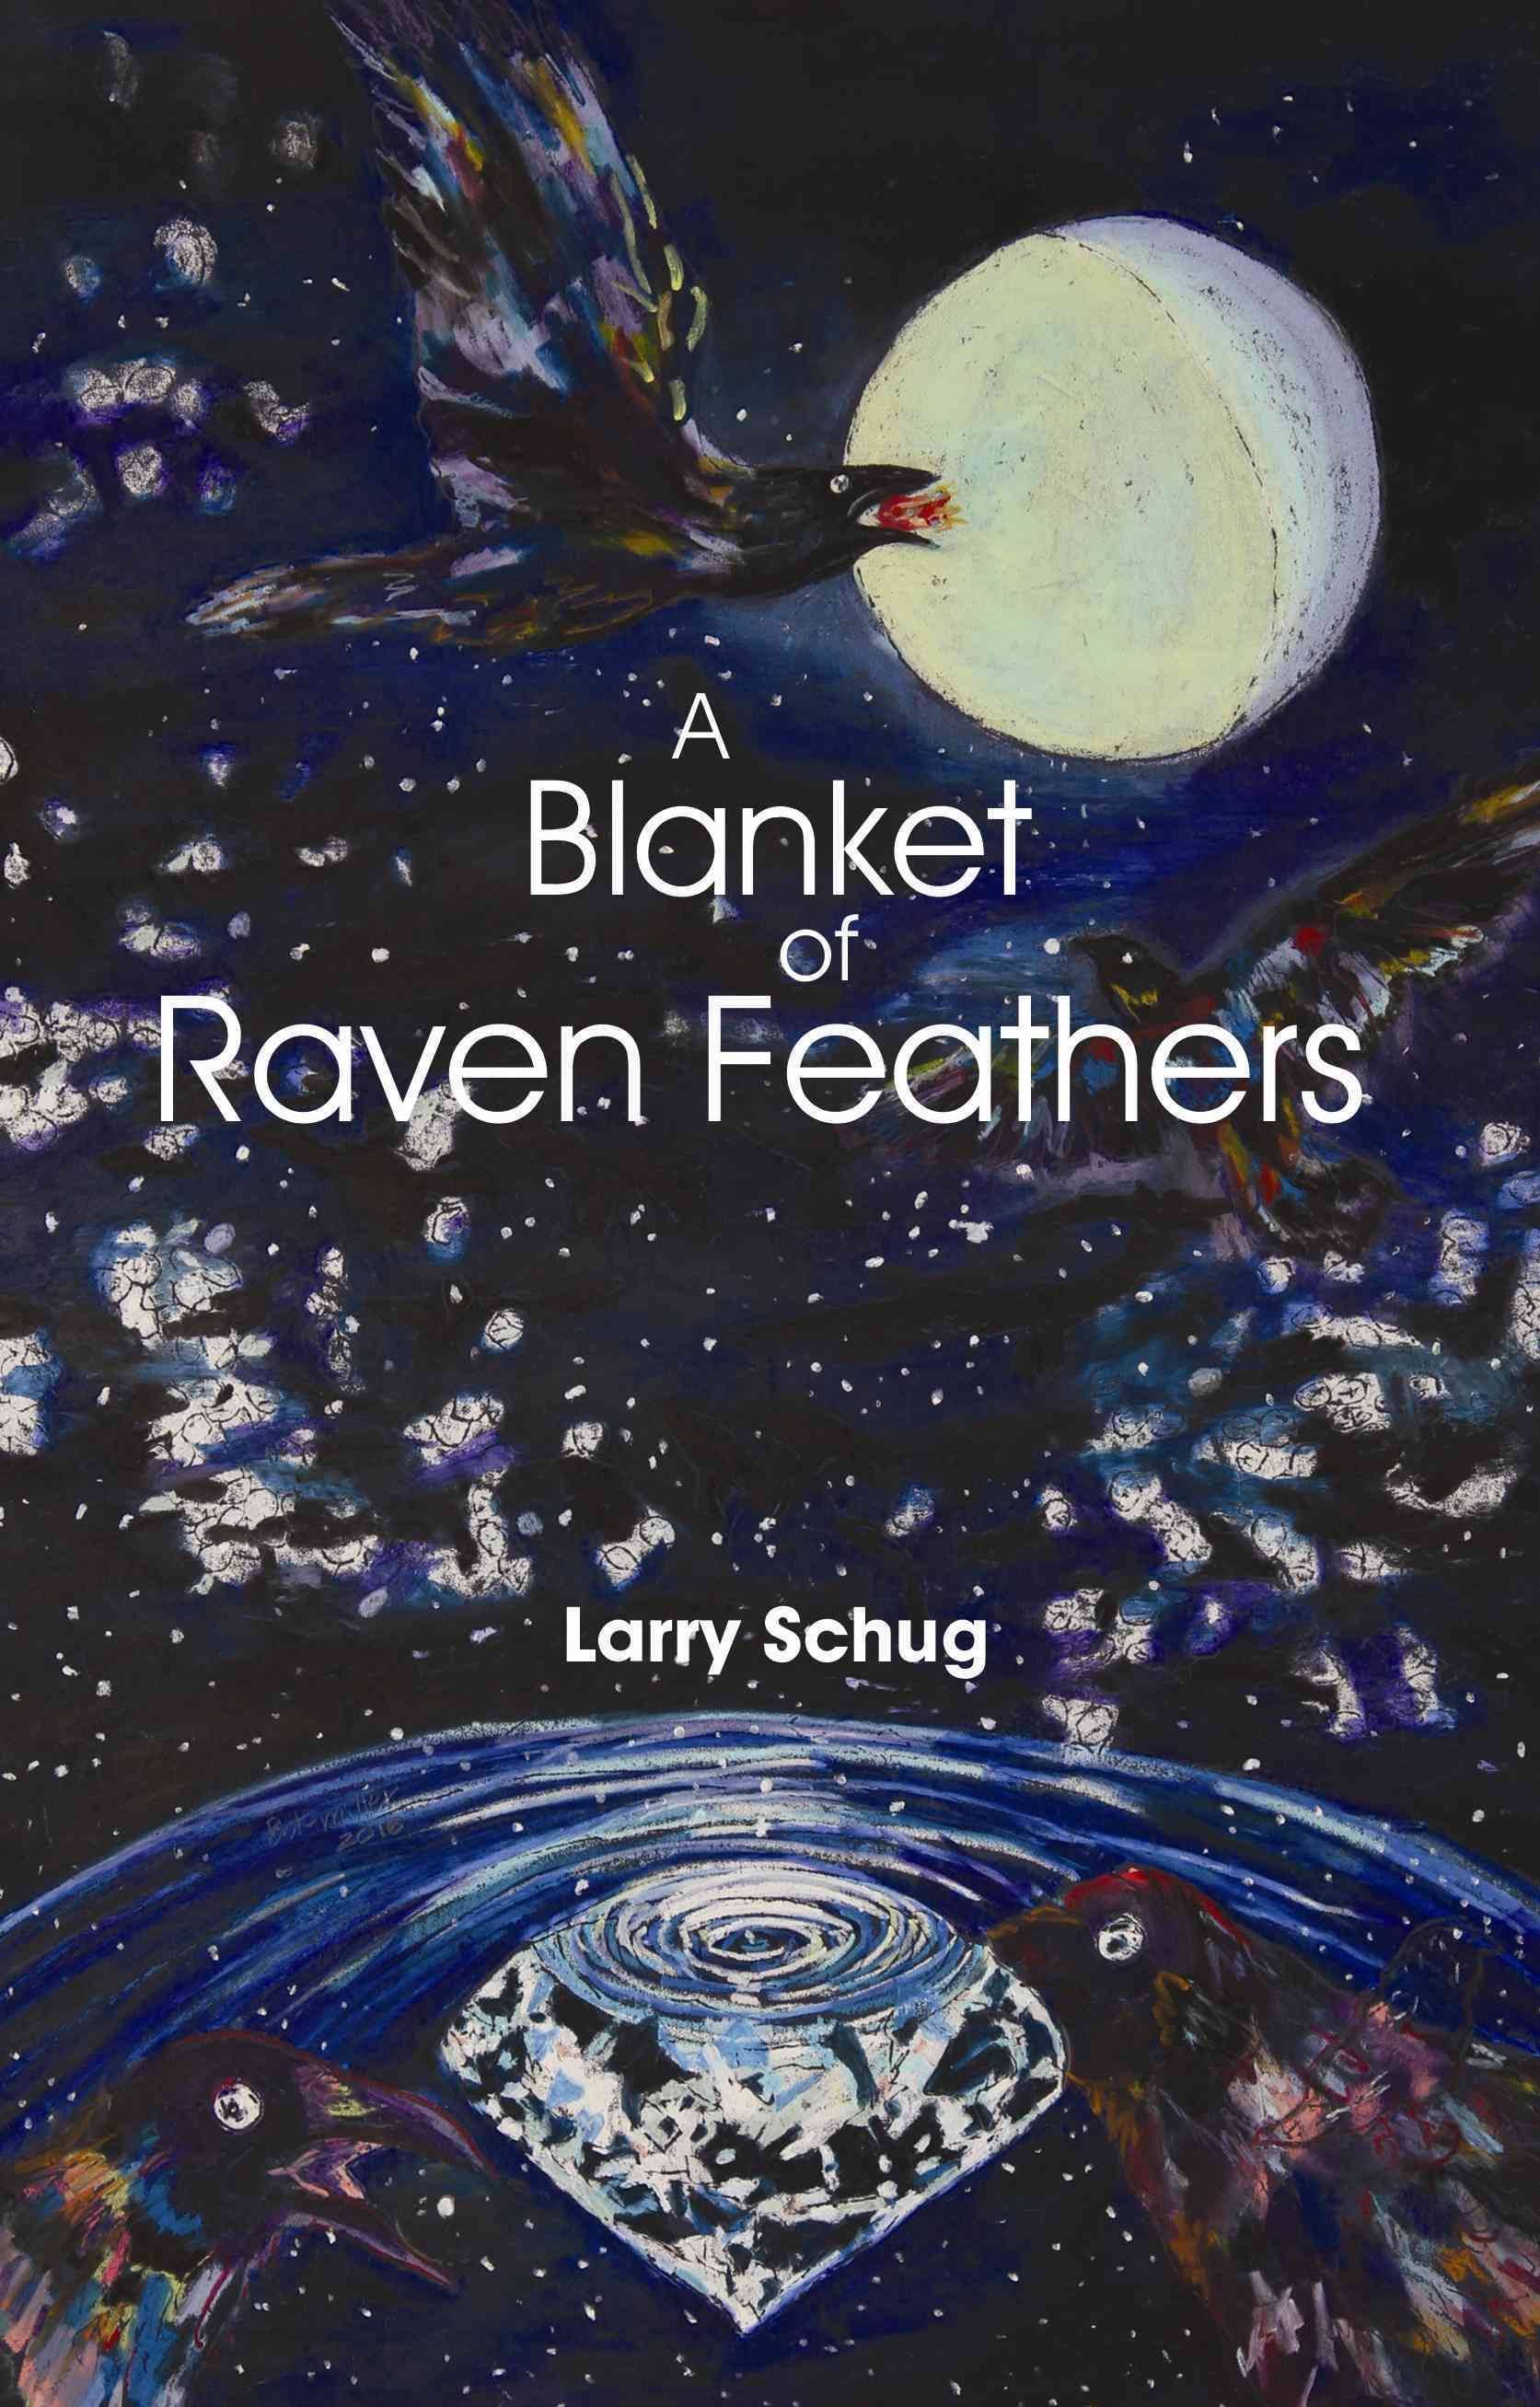 A Blanket of Raven Feathers By Larry Schug 9781682010716 (Paperback)